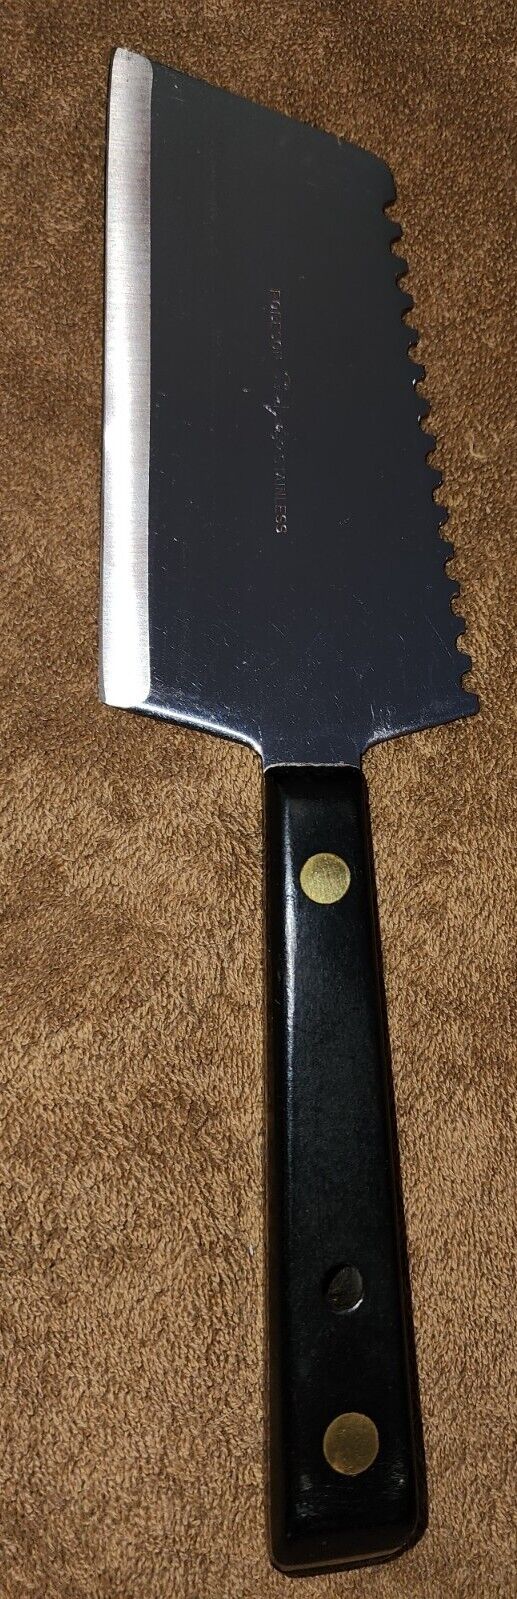 ROBESON SHUR EDGE STAINLESS VINTAGE MEAT CLEAVER USA 🇺🇸 